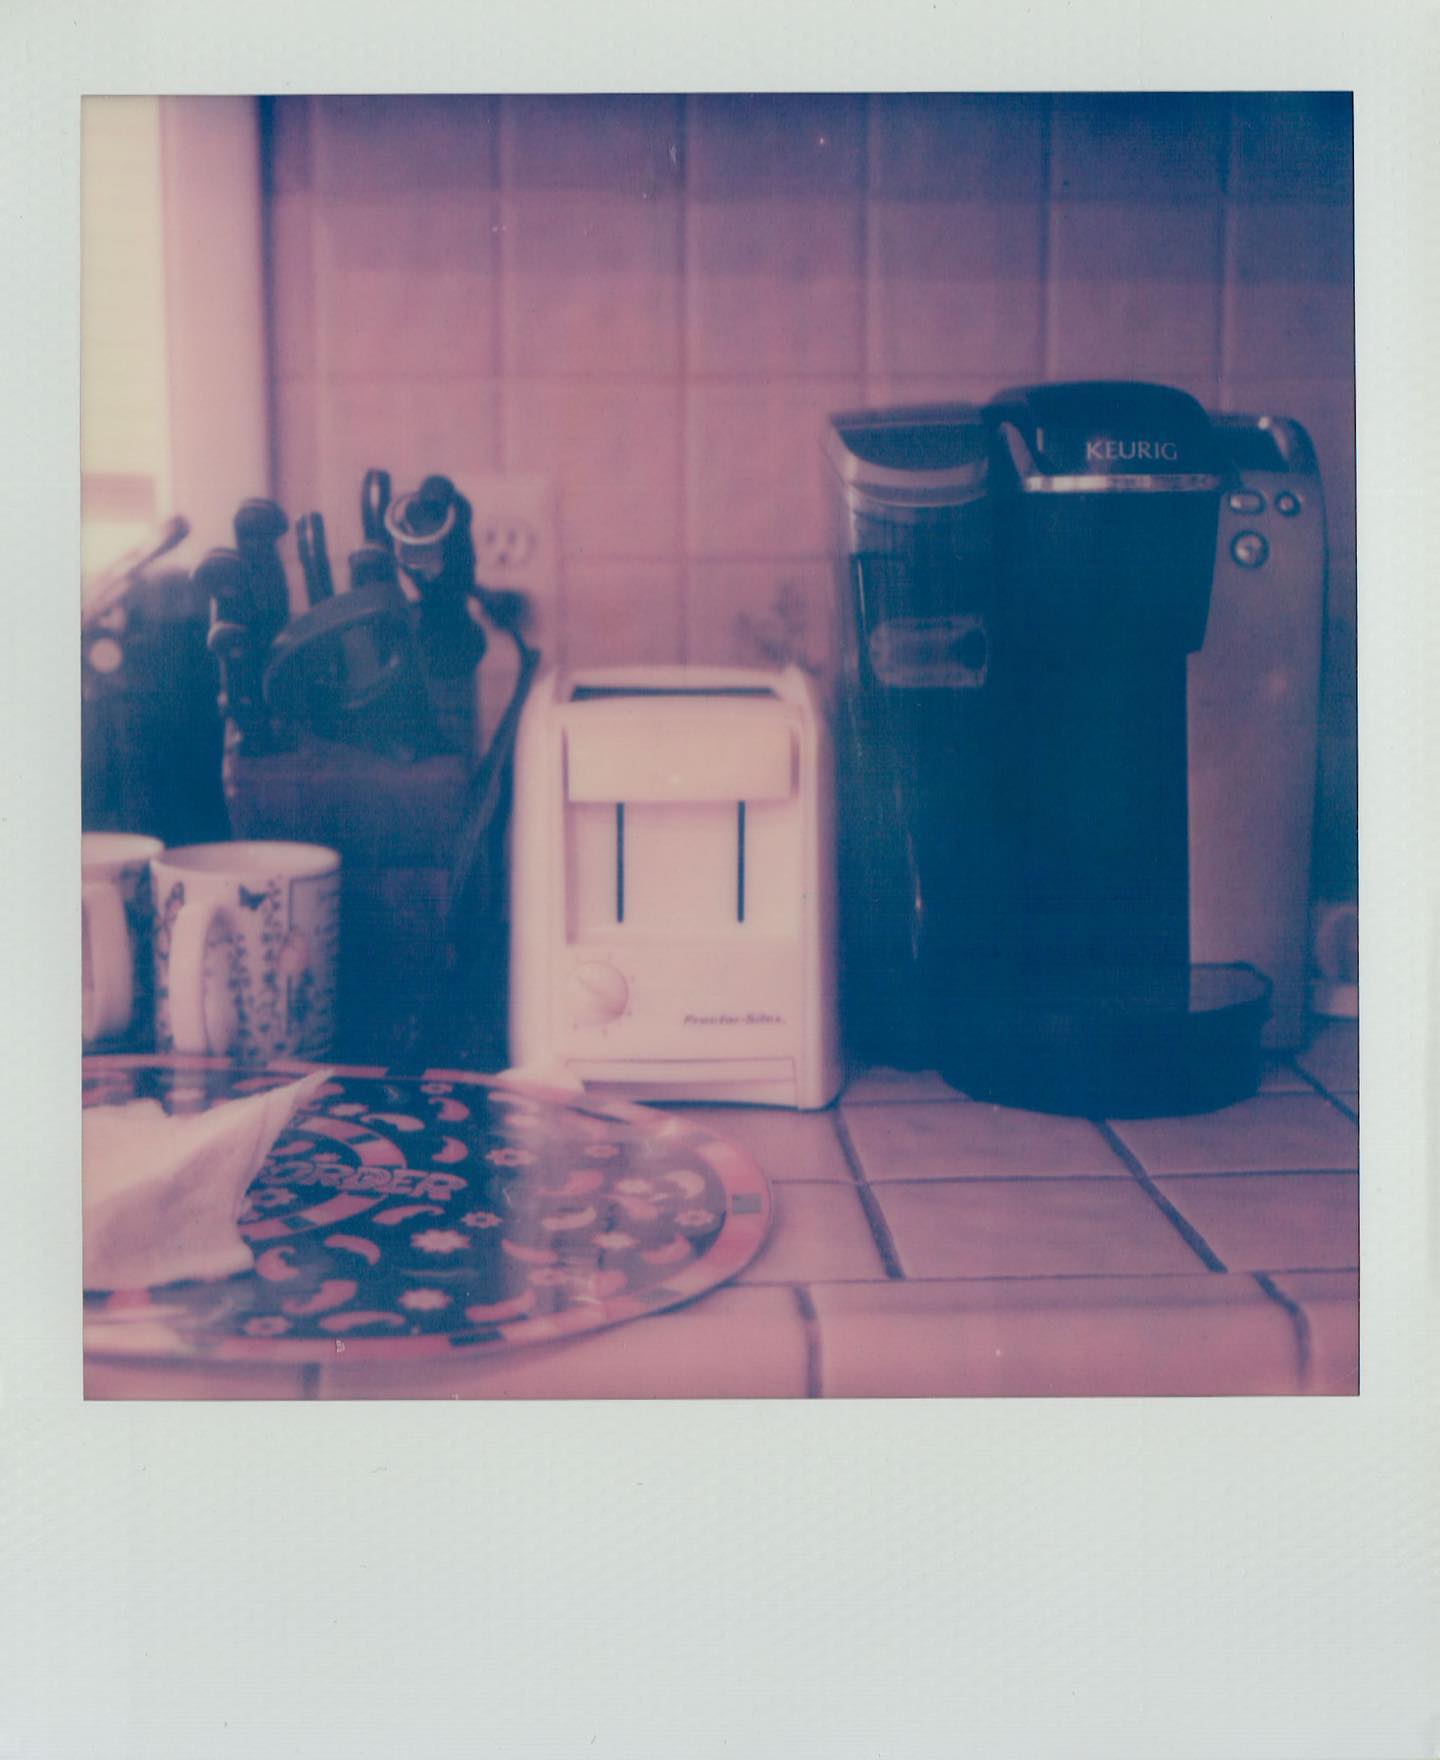 Still life with toaster and coffee maker

#polaroidweek #polaroidweek2020 #roidweek #roidweek2020